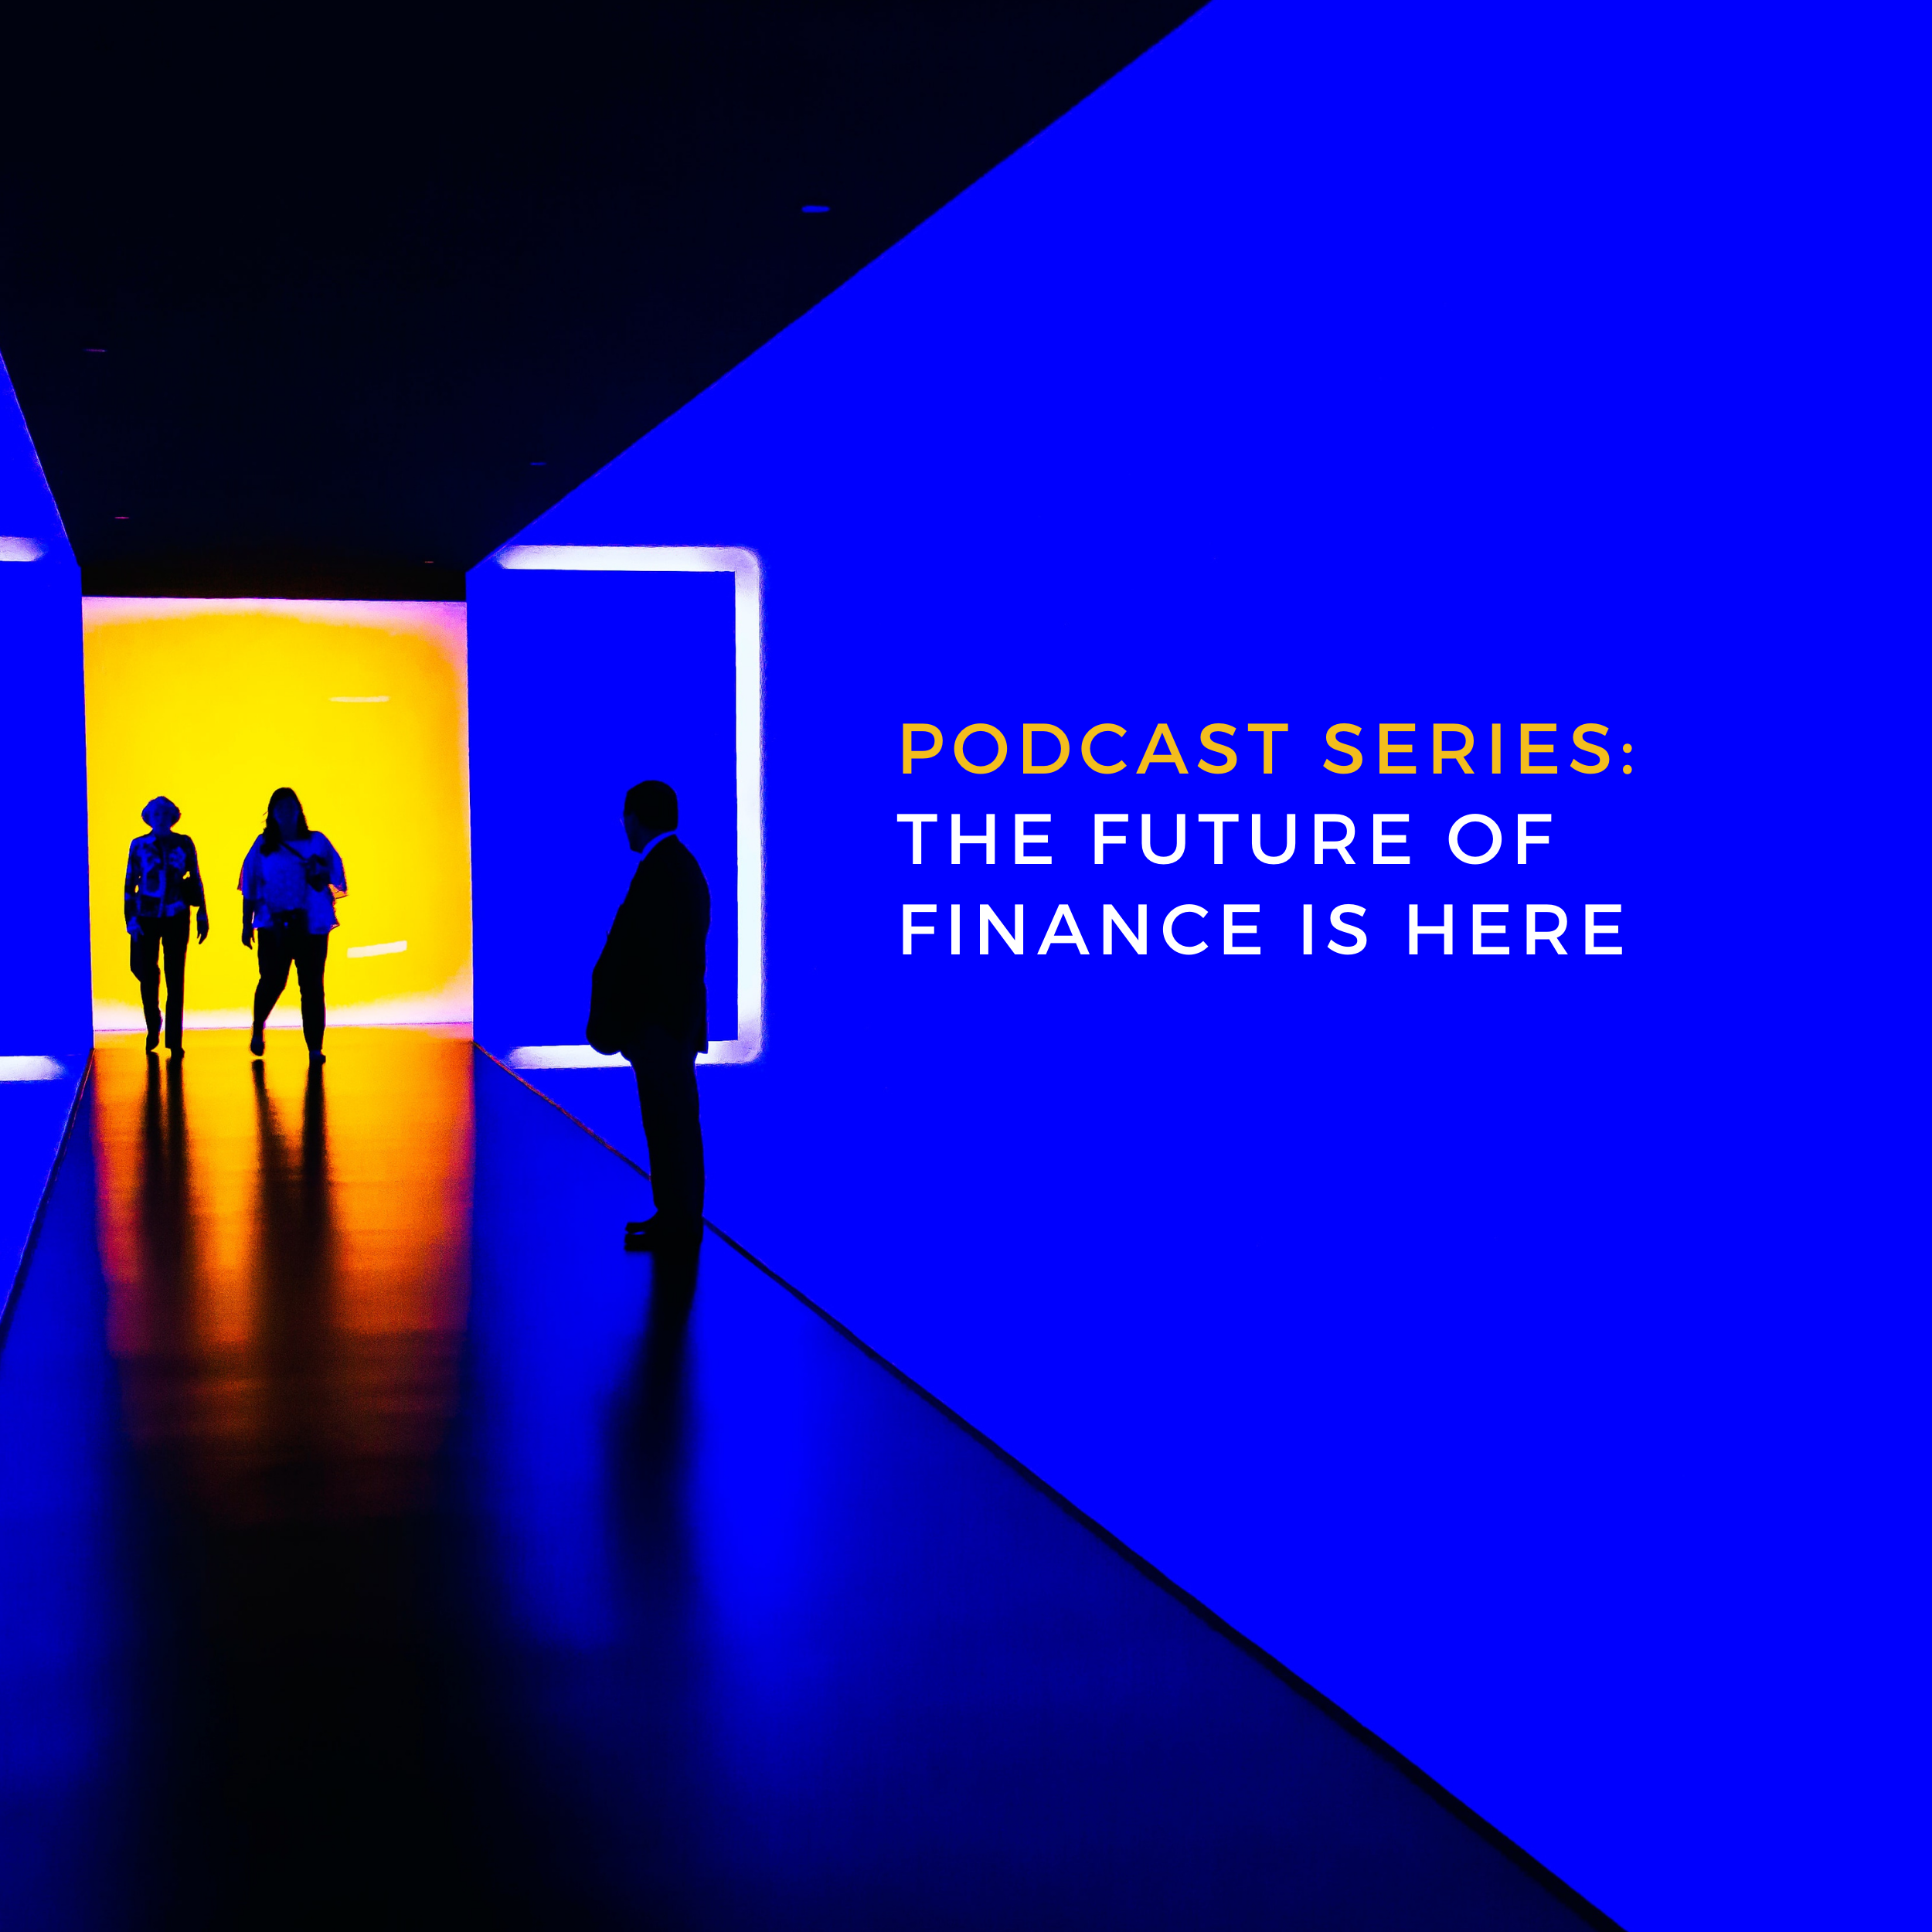 Episode 1.2 - Ross Greenwood discusses how the finance industry is ’playing a long game’